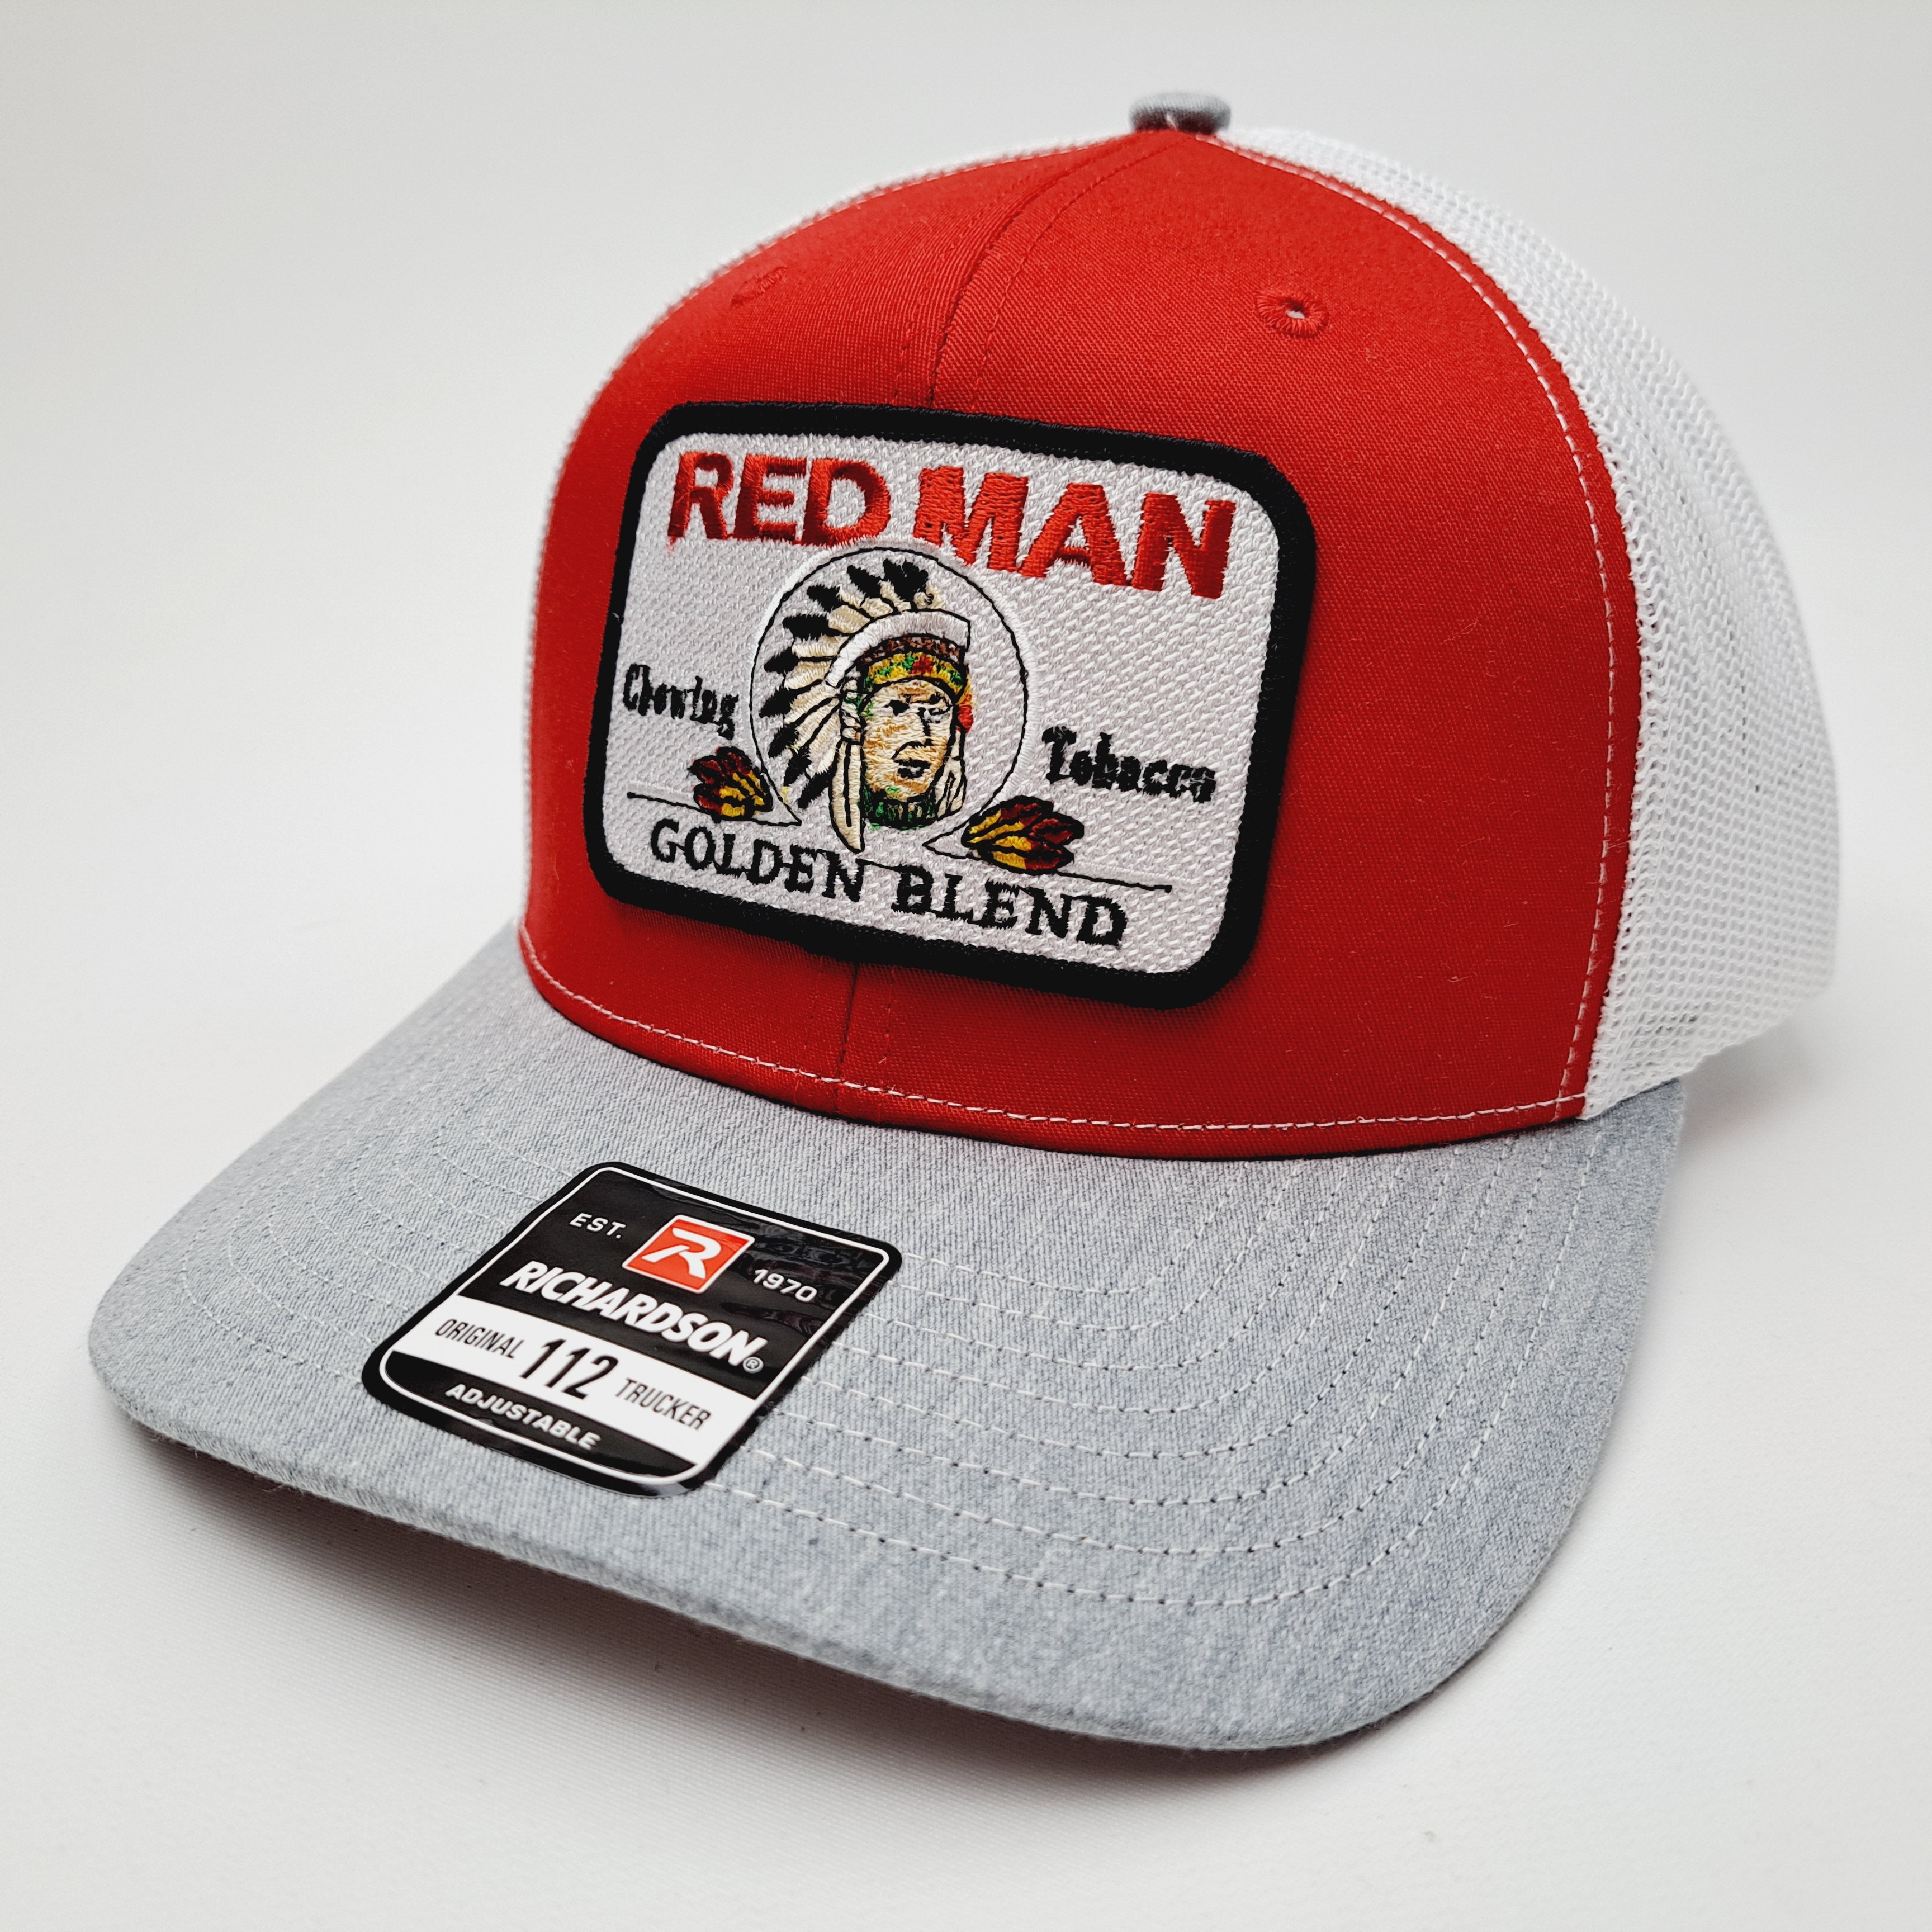 Red Man Embroidered Patch Richardson 112 Trucker Mesh Snapback Cap 